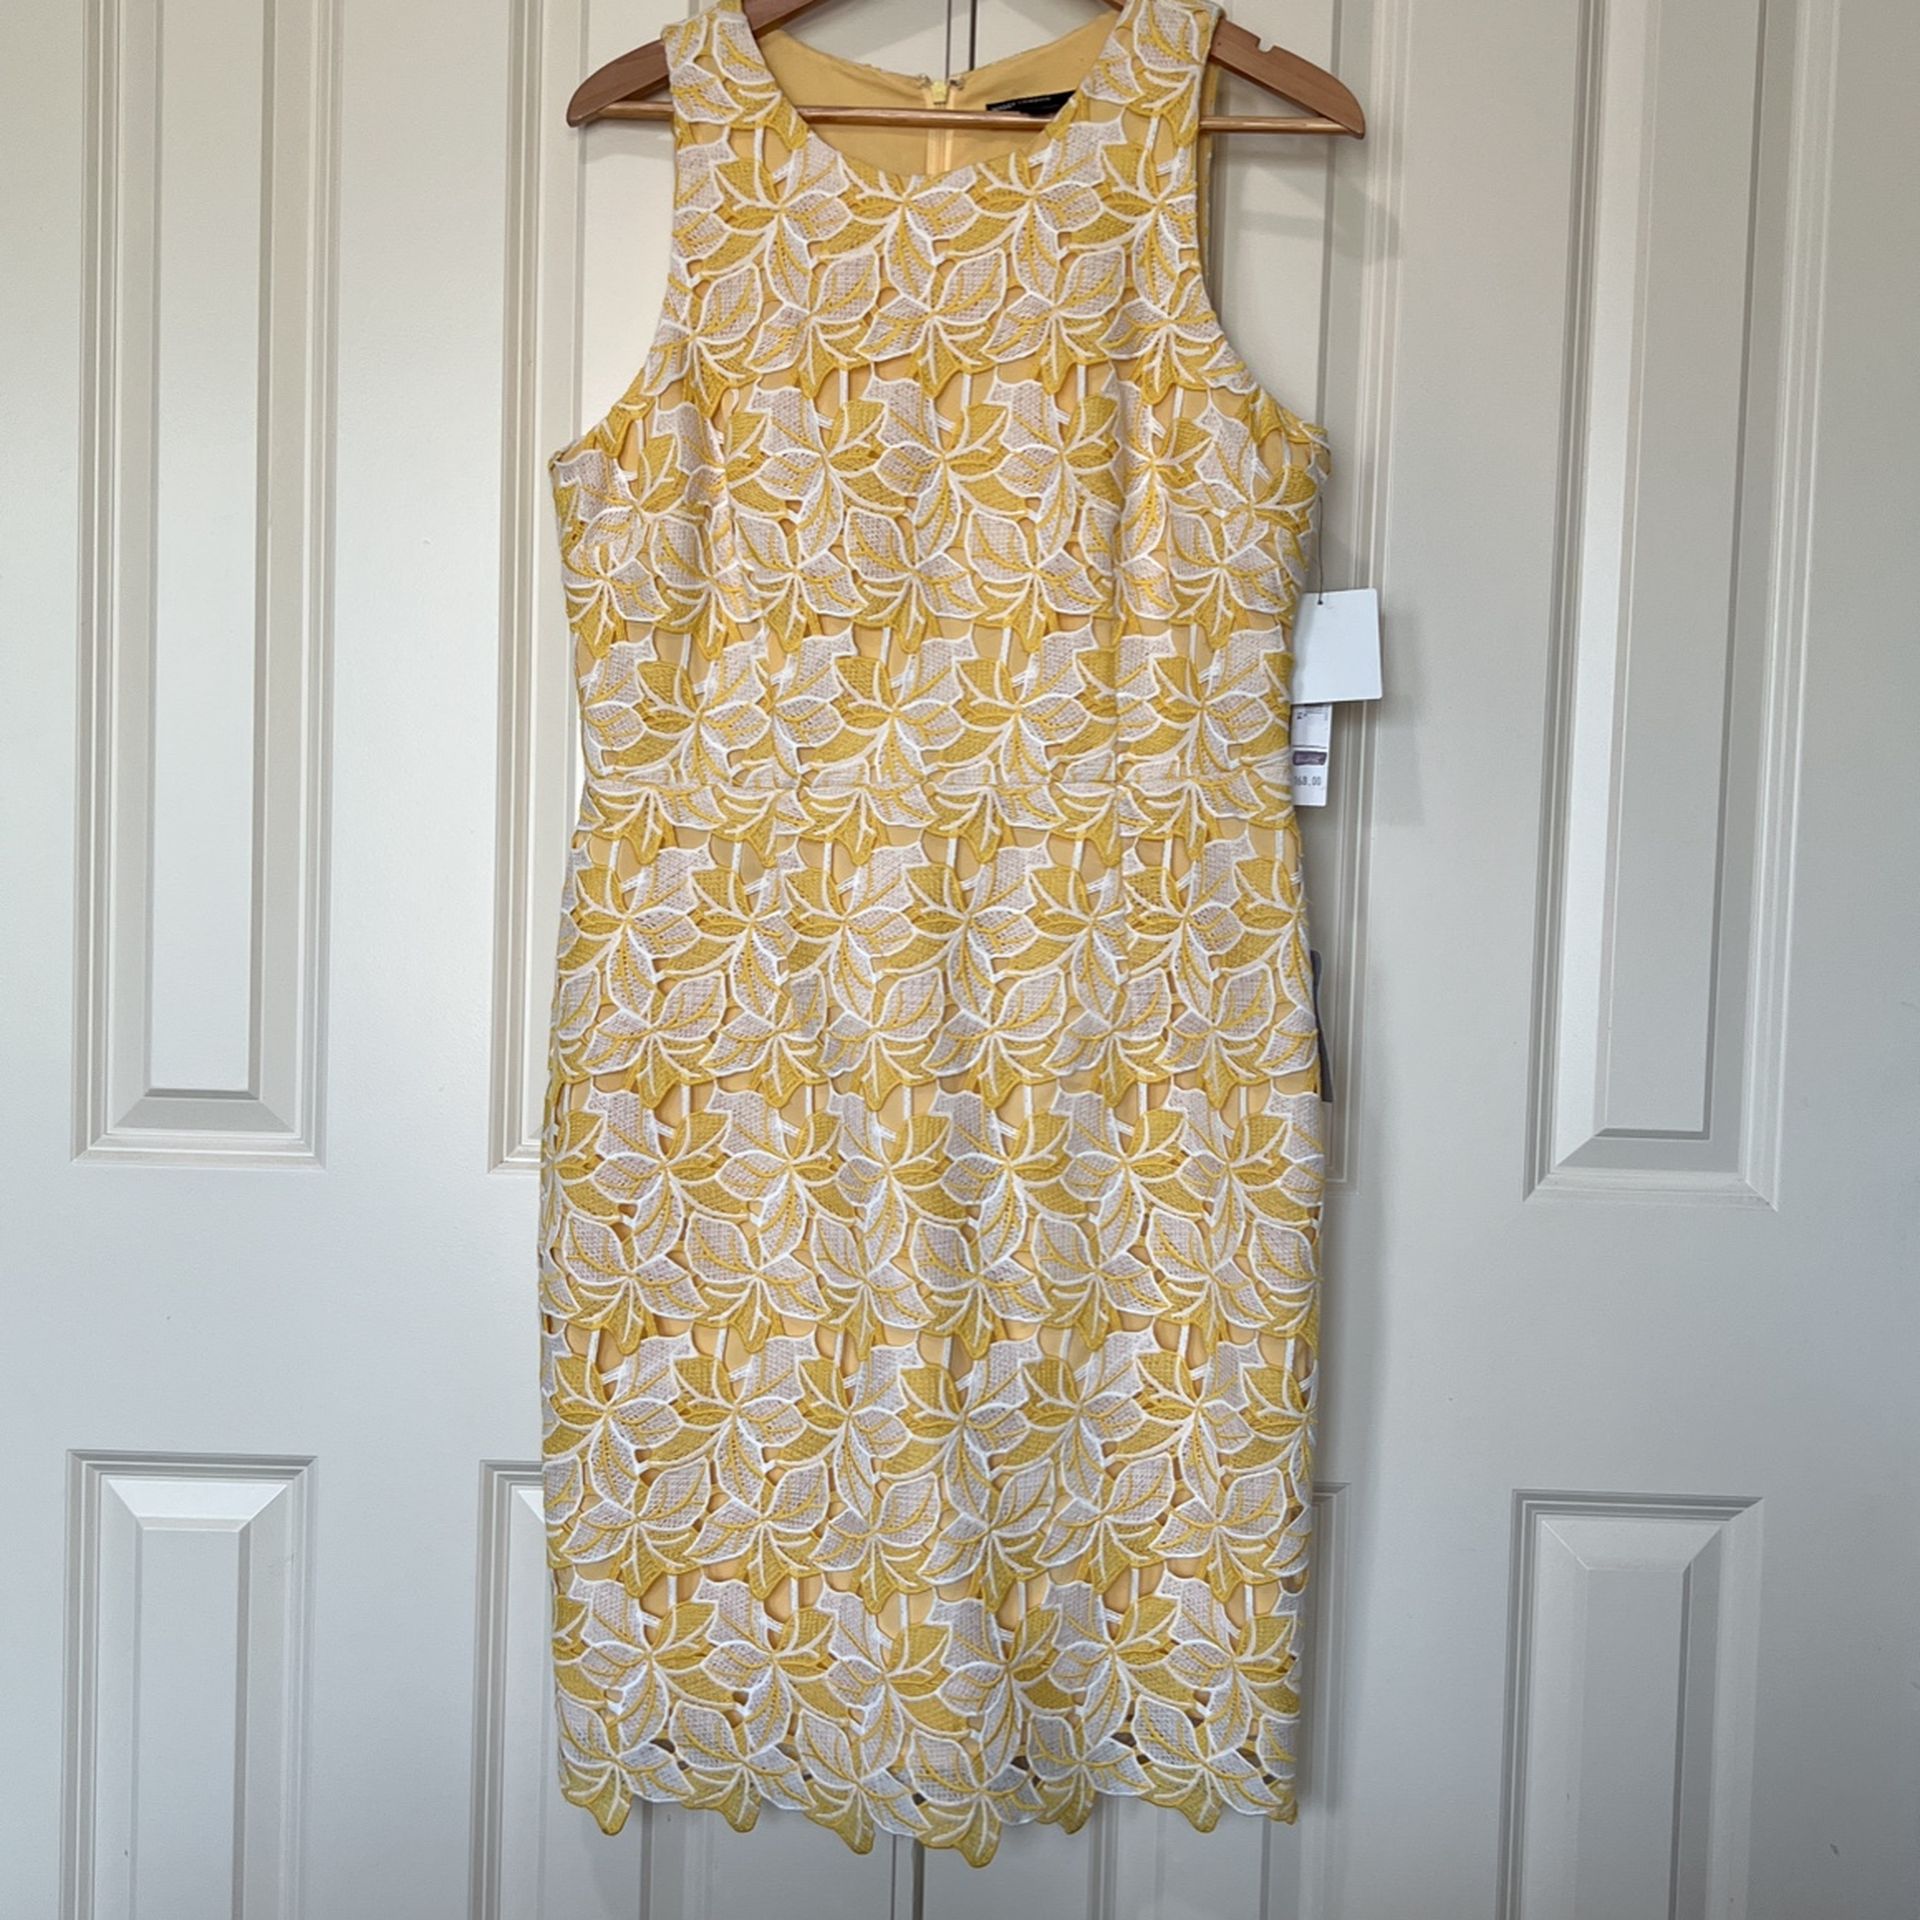 Maggy London Dress, Size 14, Yellow, Tags Attached